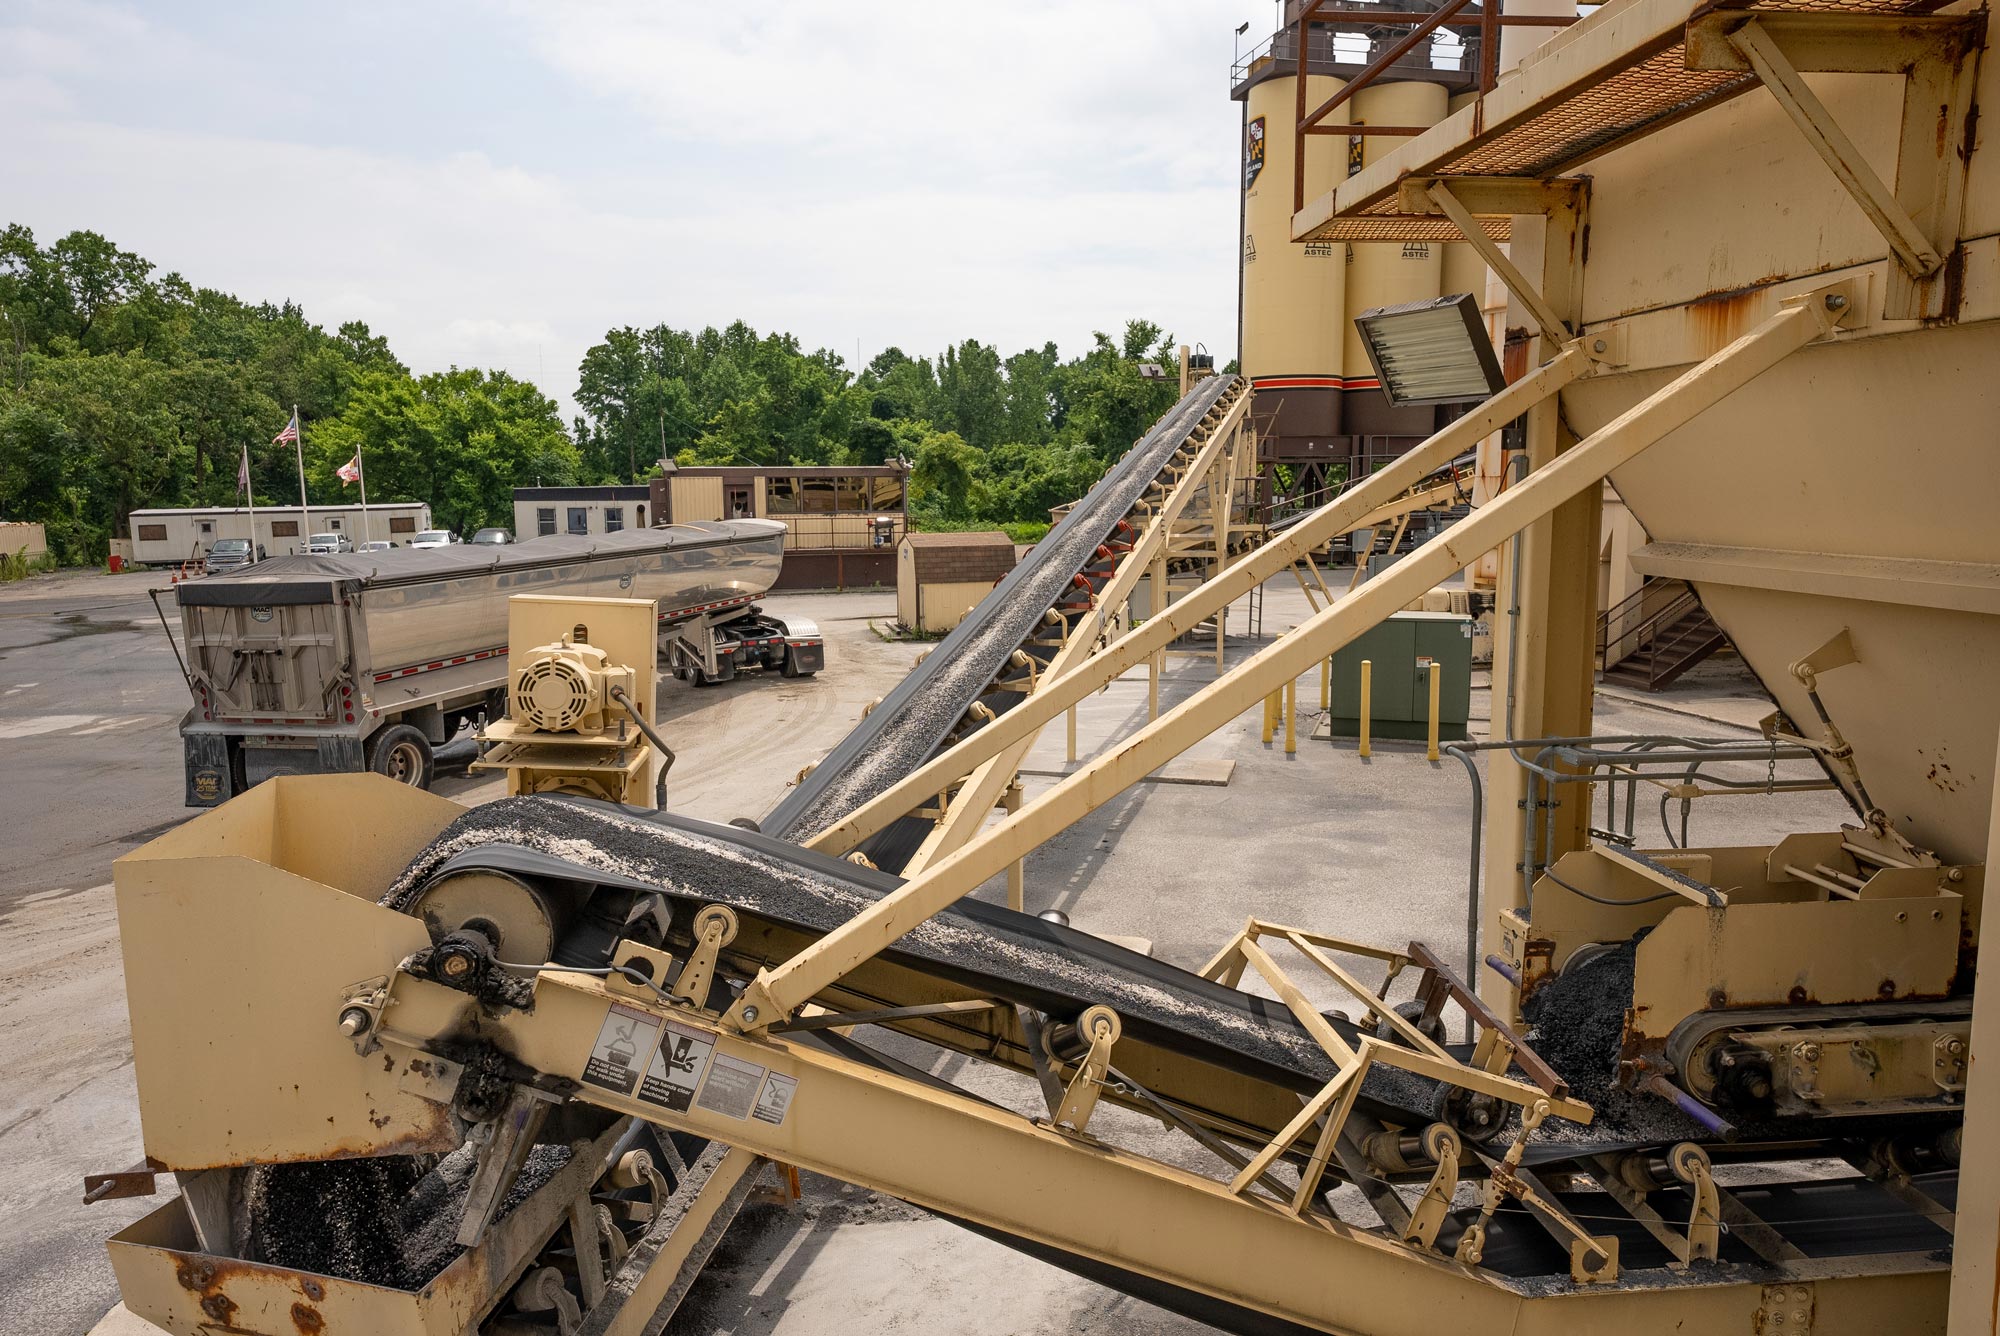 An asphalt conveyor belt transporting asphalt located at an asphalt storage site owned and operated by Gray & Son a leading site and development contractor in Maryland.